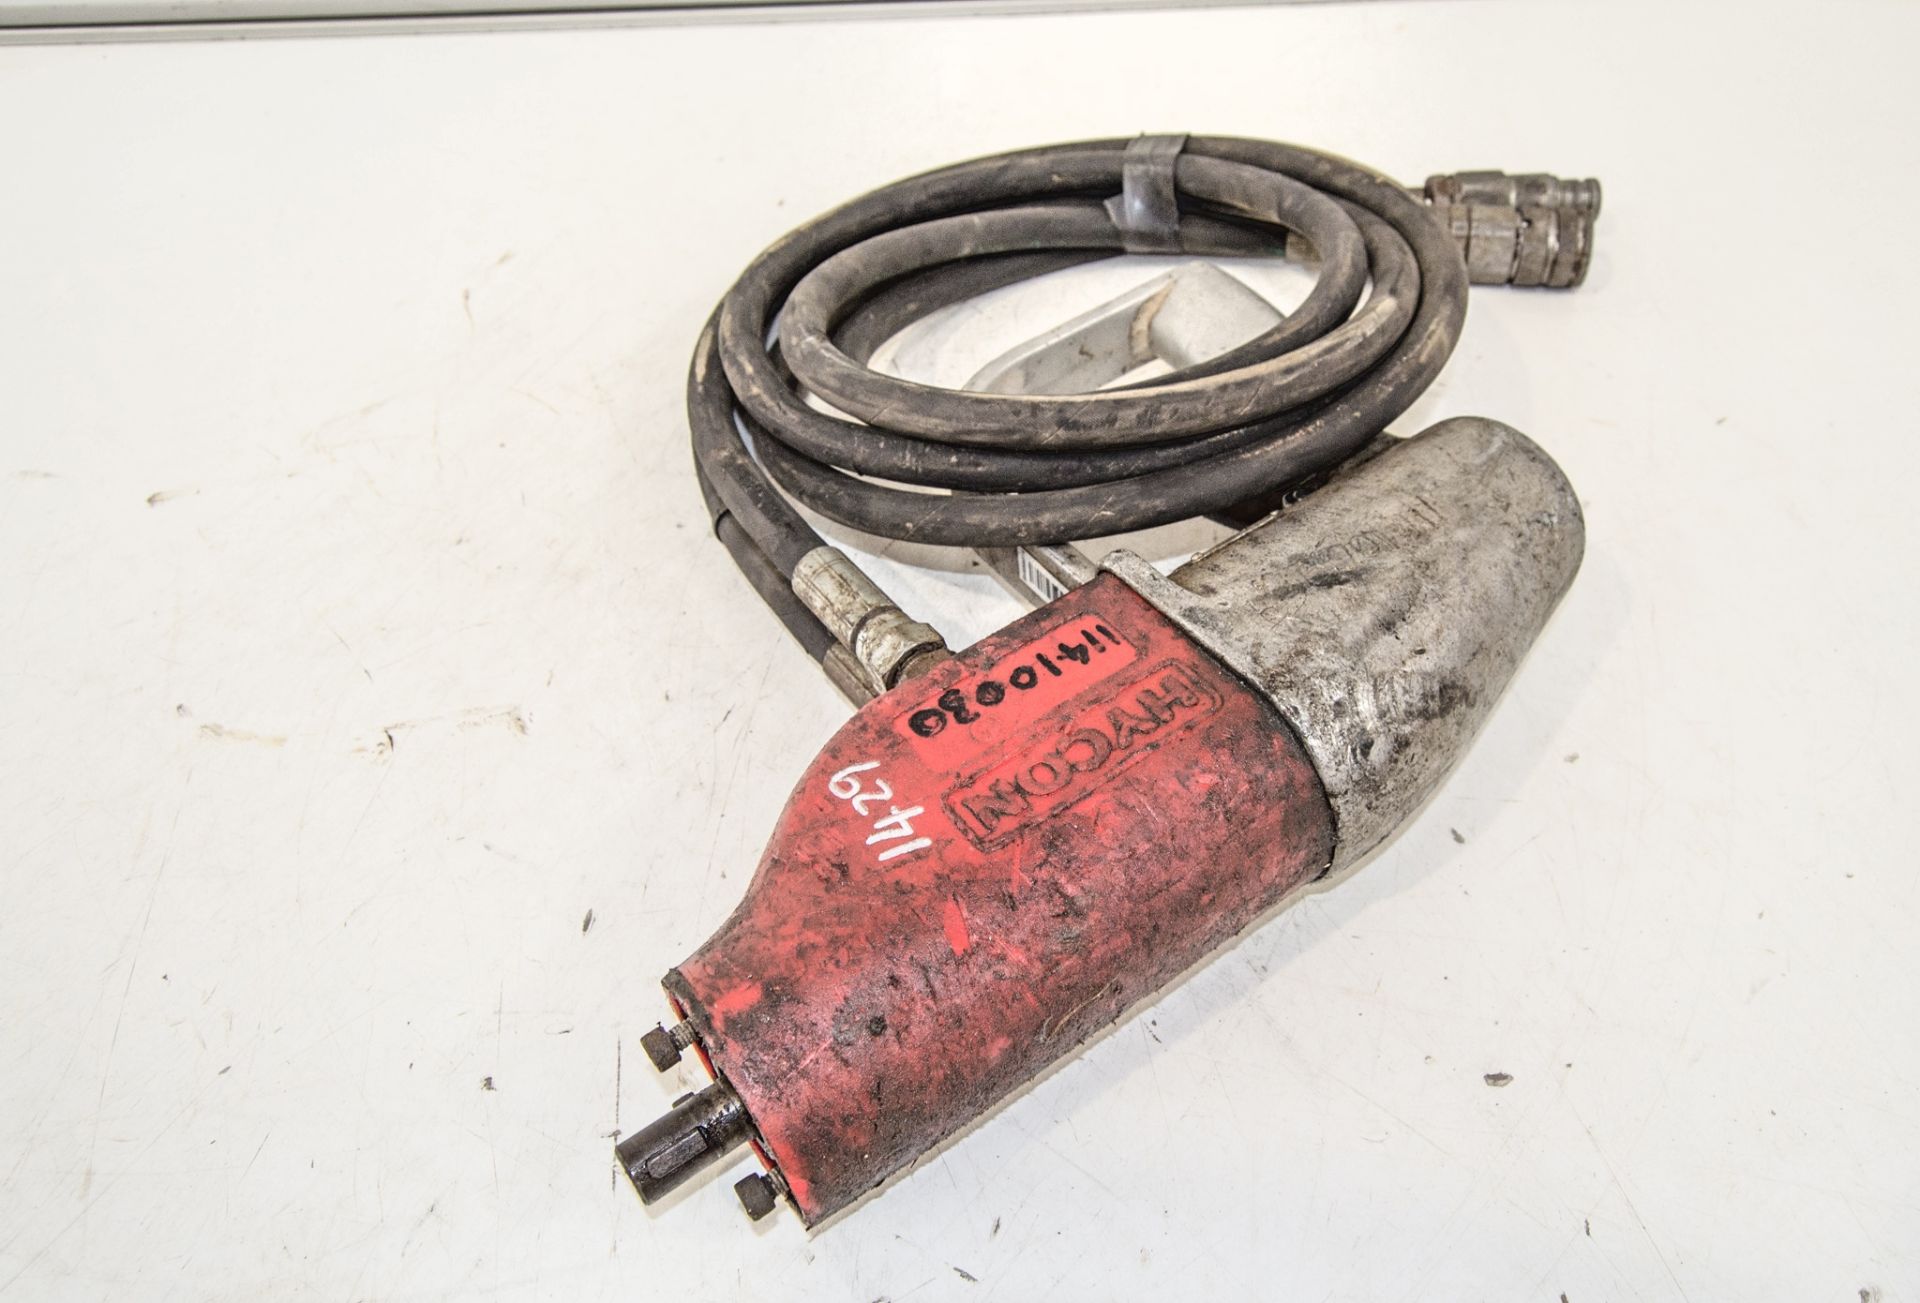 Hycon hydraulic diamond core drill ** Parts missing ** 11410030 - Image 2 of 2